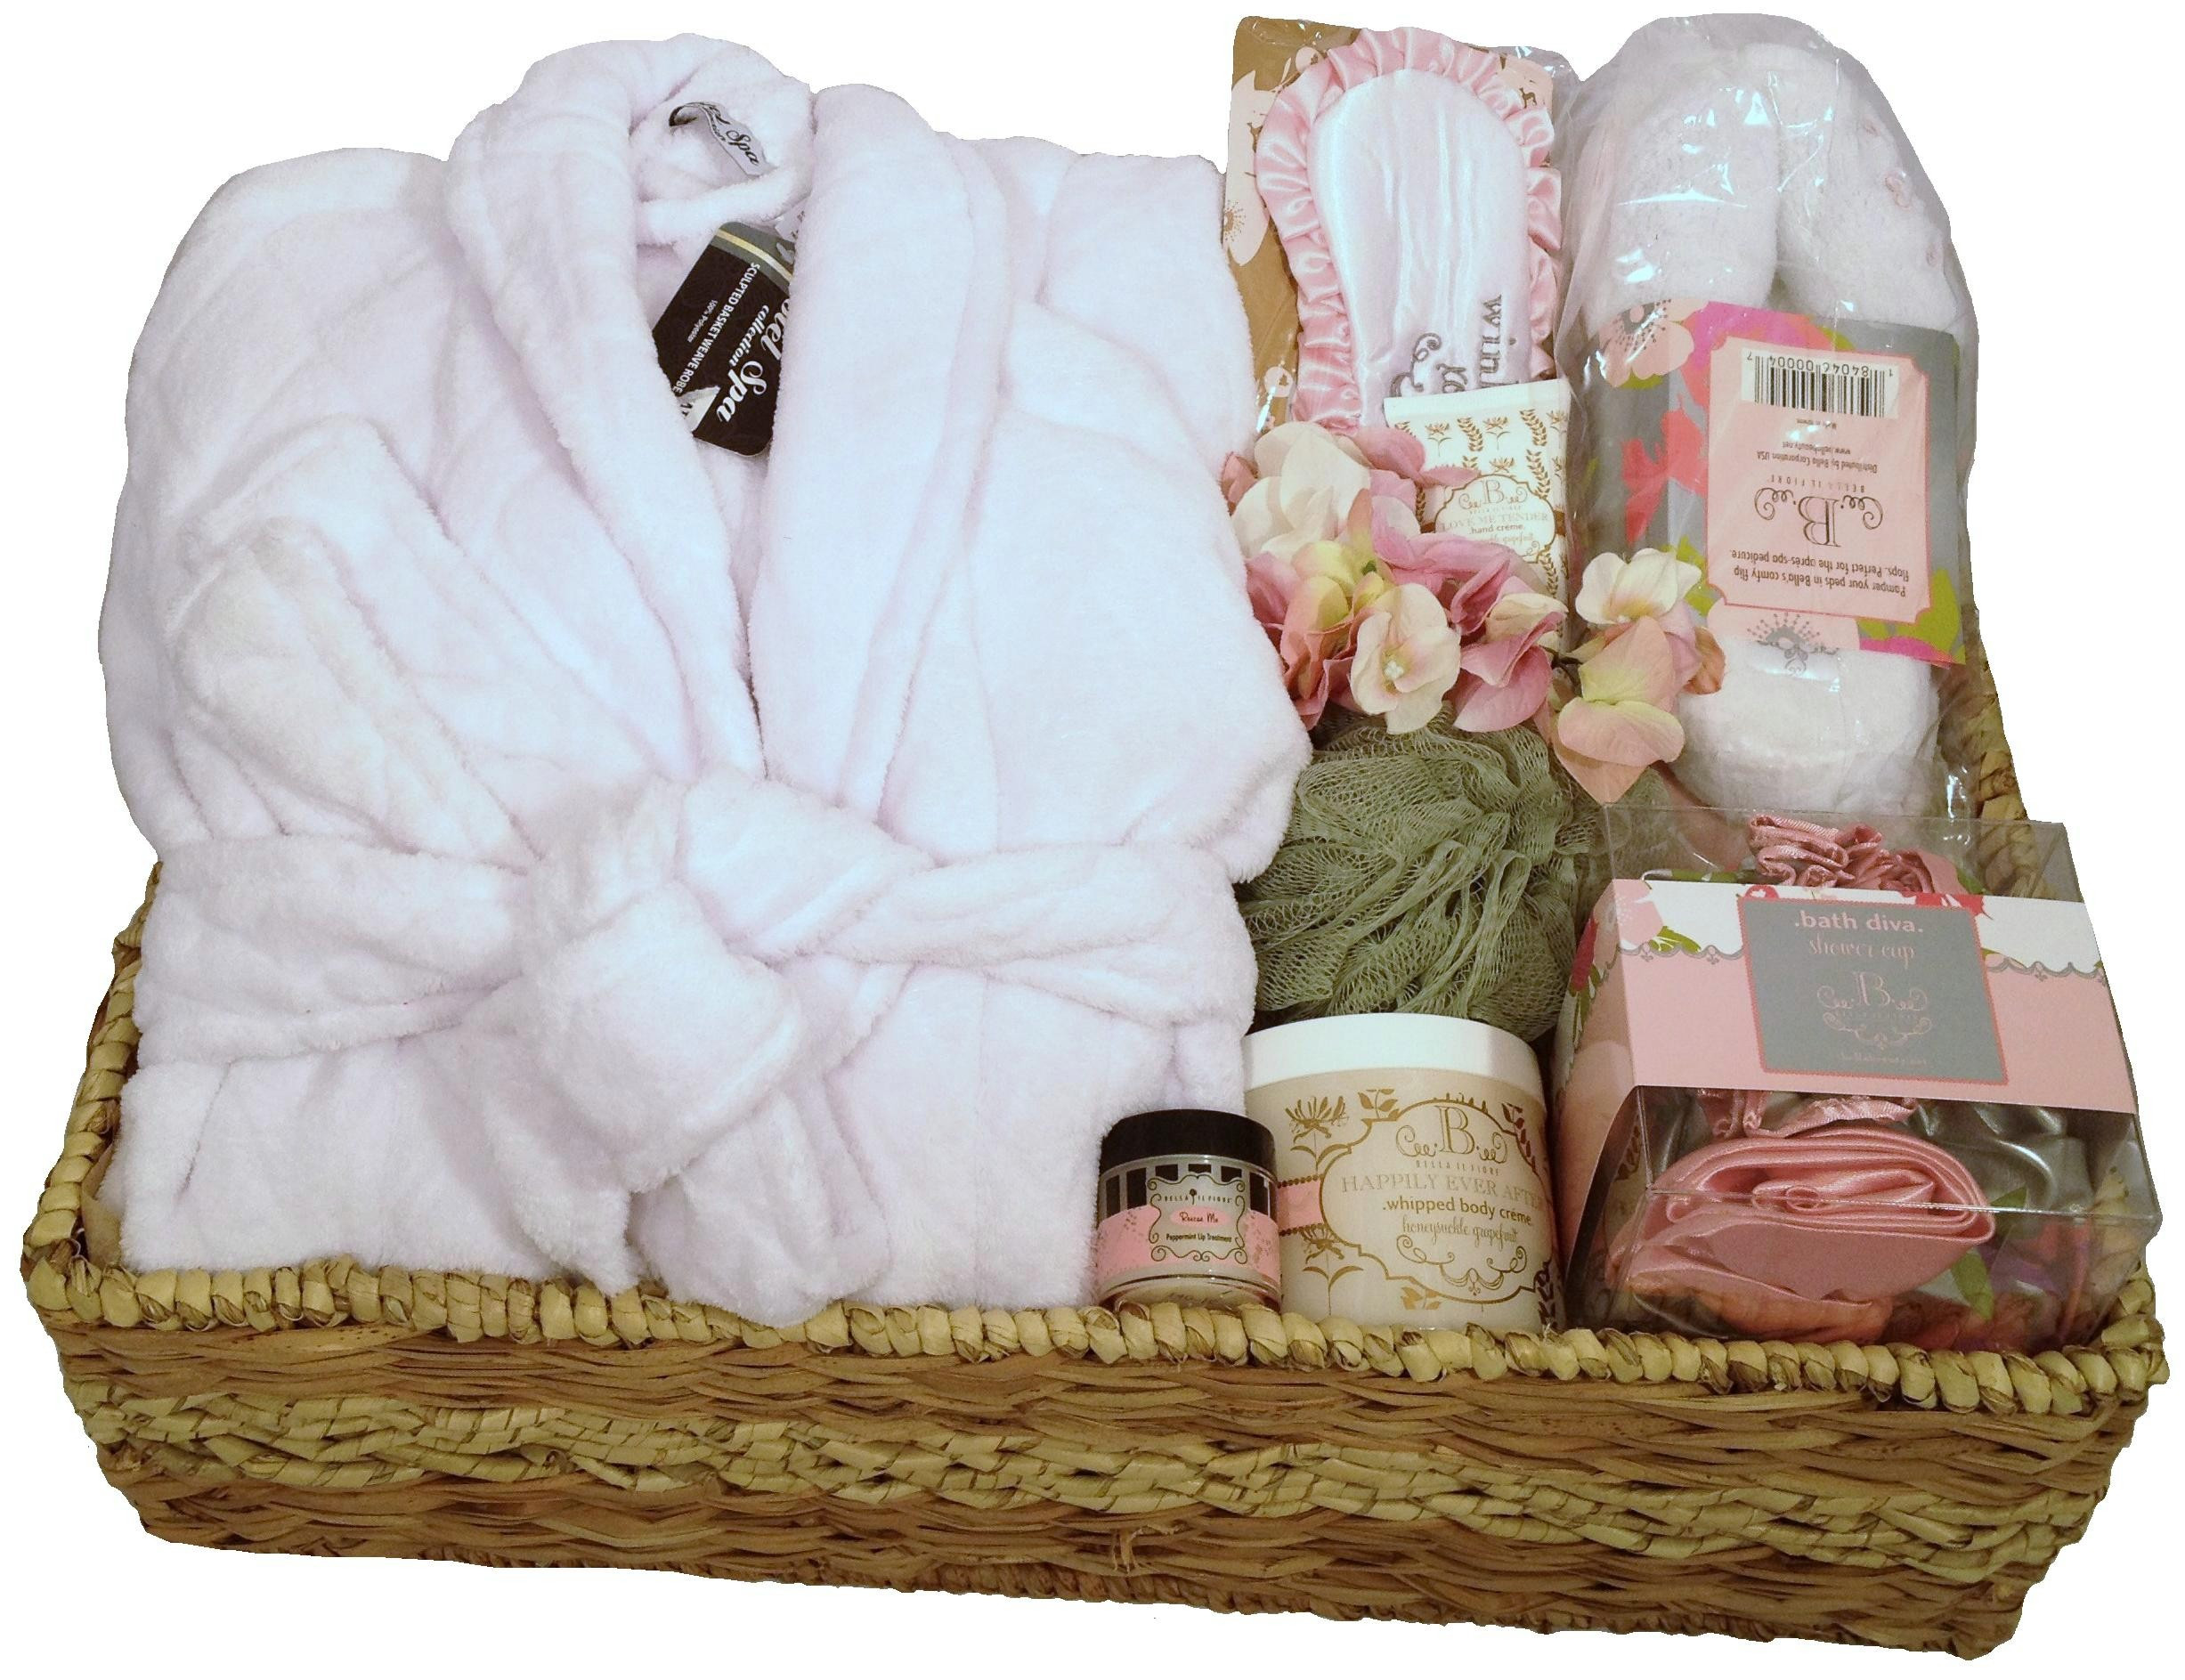 Spa Gift Baskets Ideas
 DELUXE HOTEL SPA GIFT BASKET Sweet Day Designs